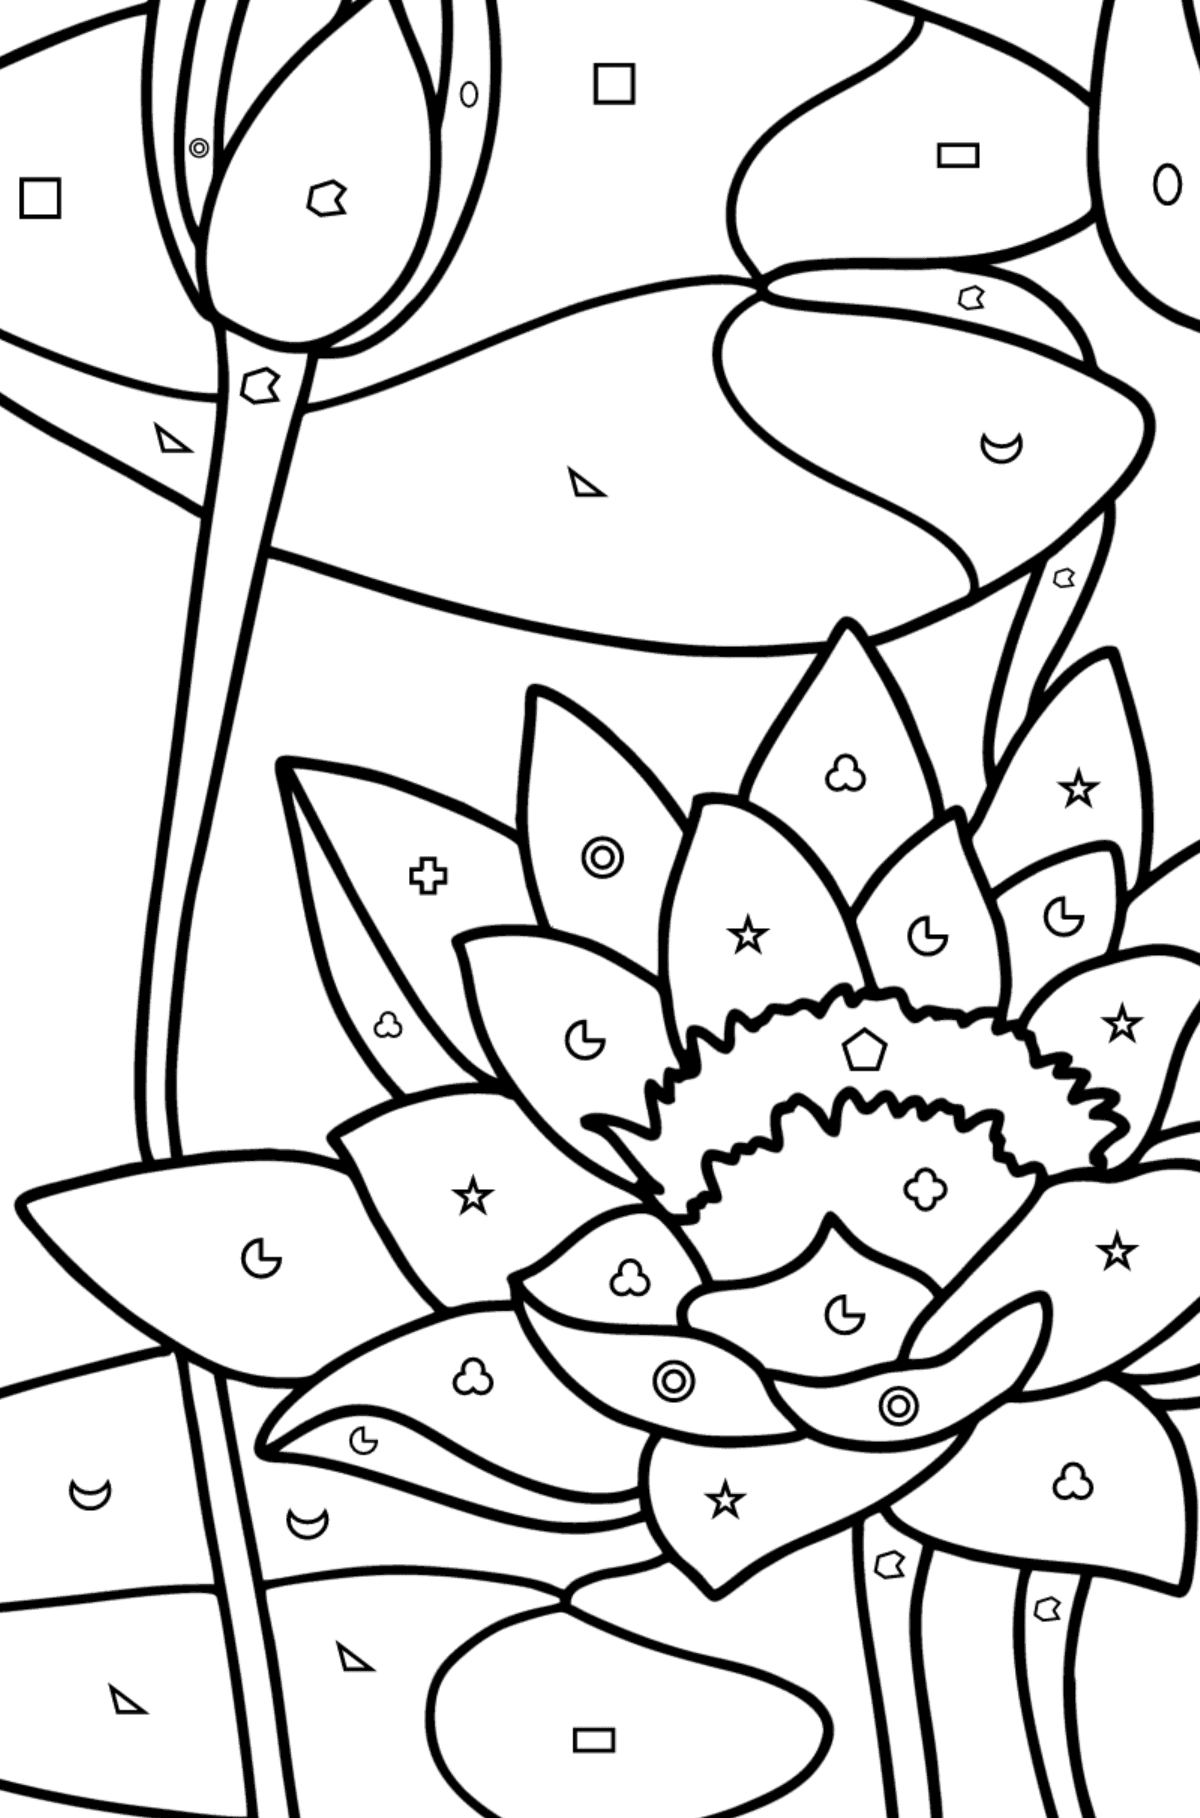 Water lily coloring page - Coloring by Geometric Shapes for Kids